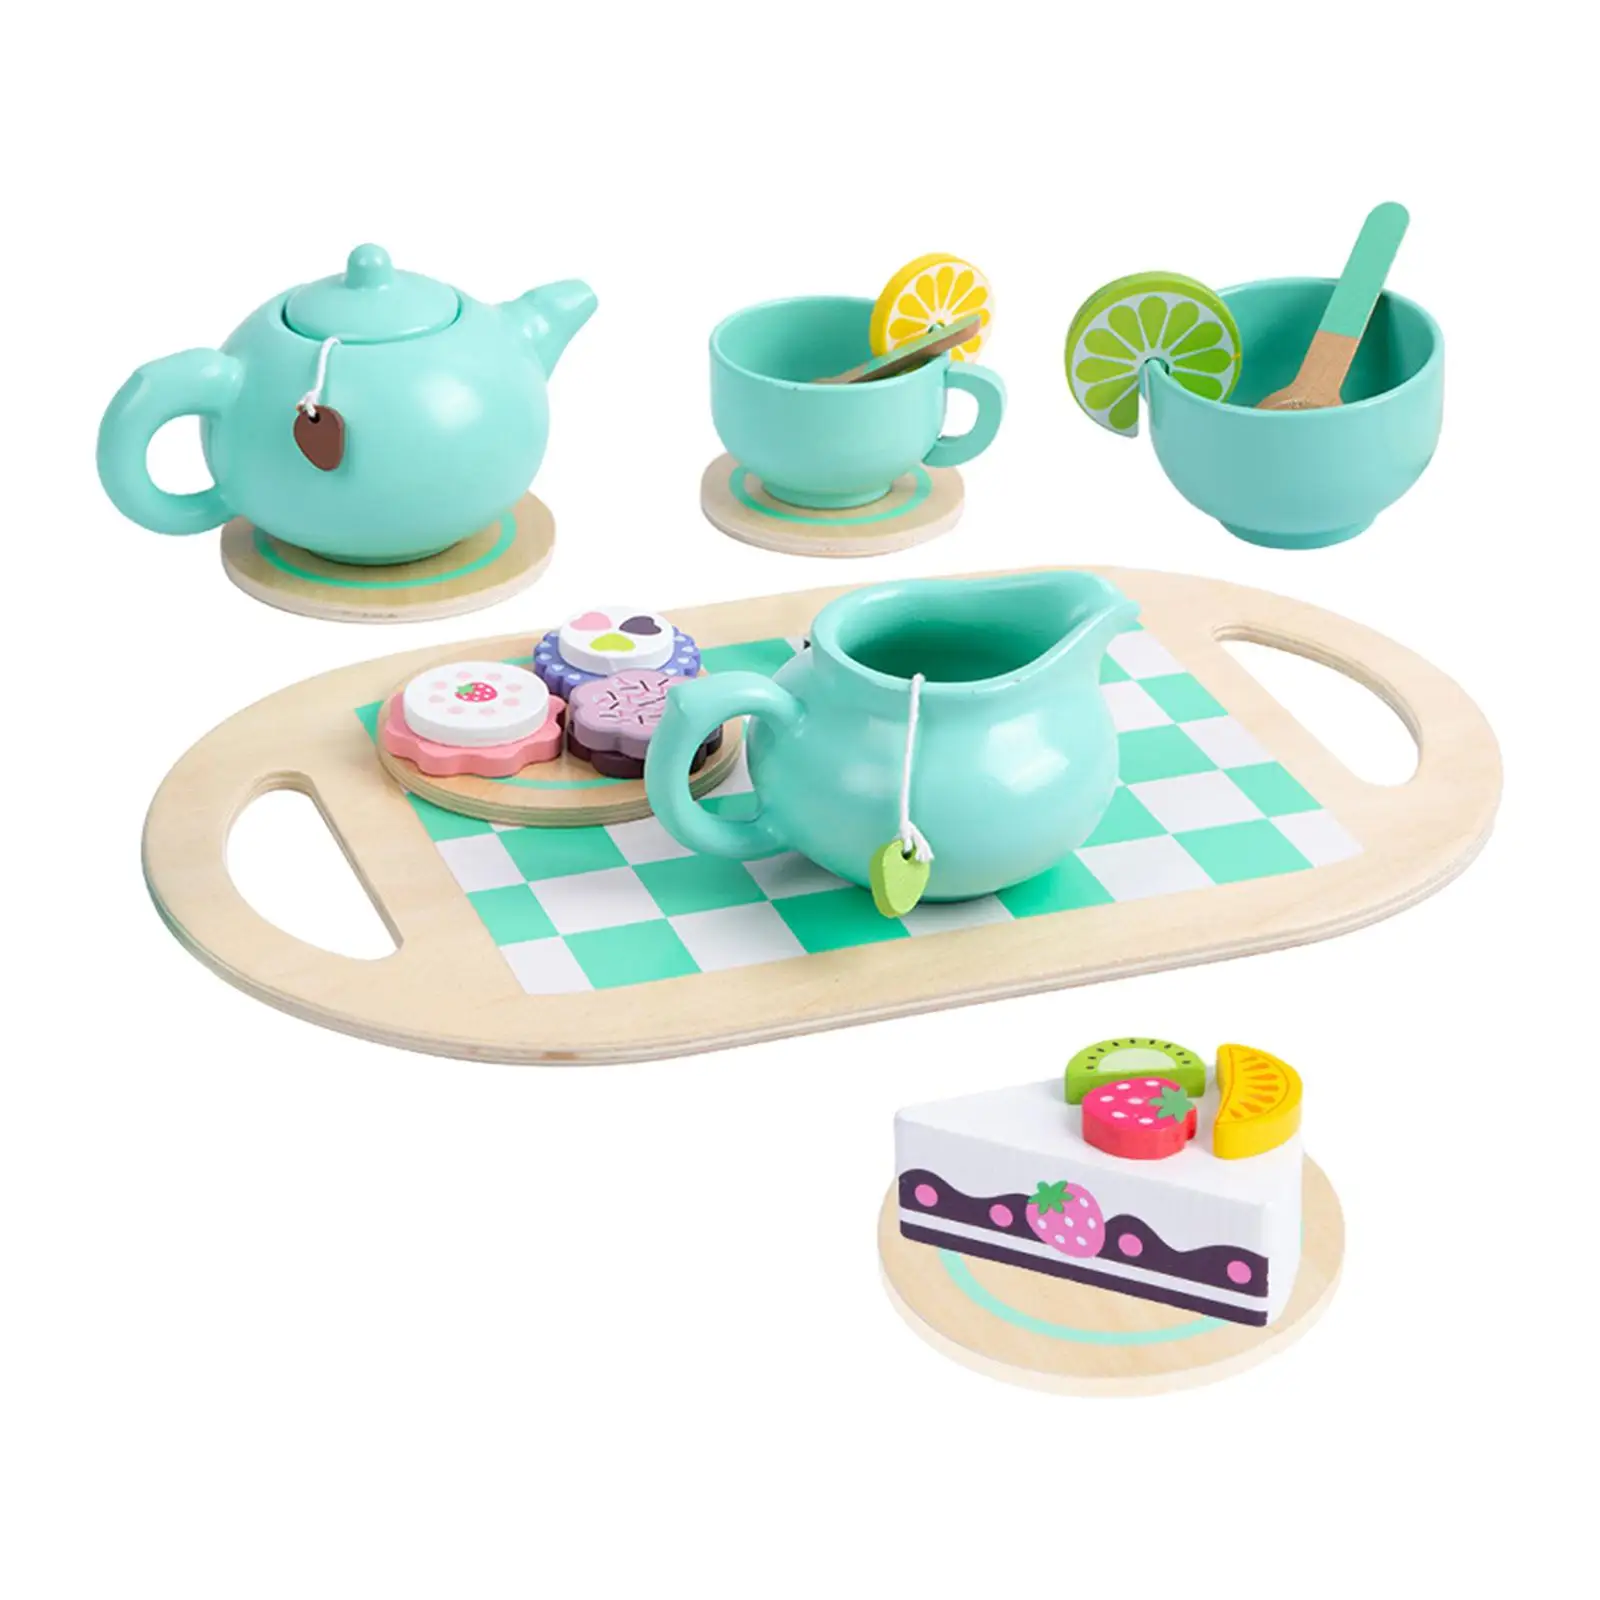 Wooden Afternoon Tea Set Toy Kitchen Accessories Handiccraft Toy Montessori Educational Pretend Playing Food for Birthday Gift